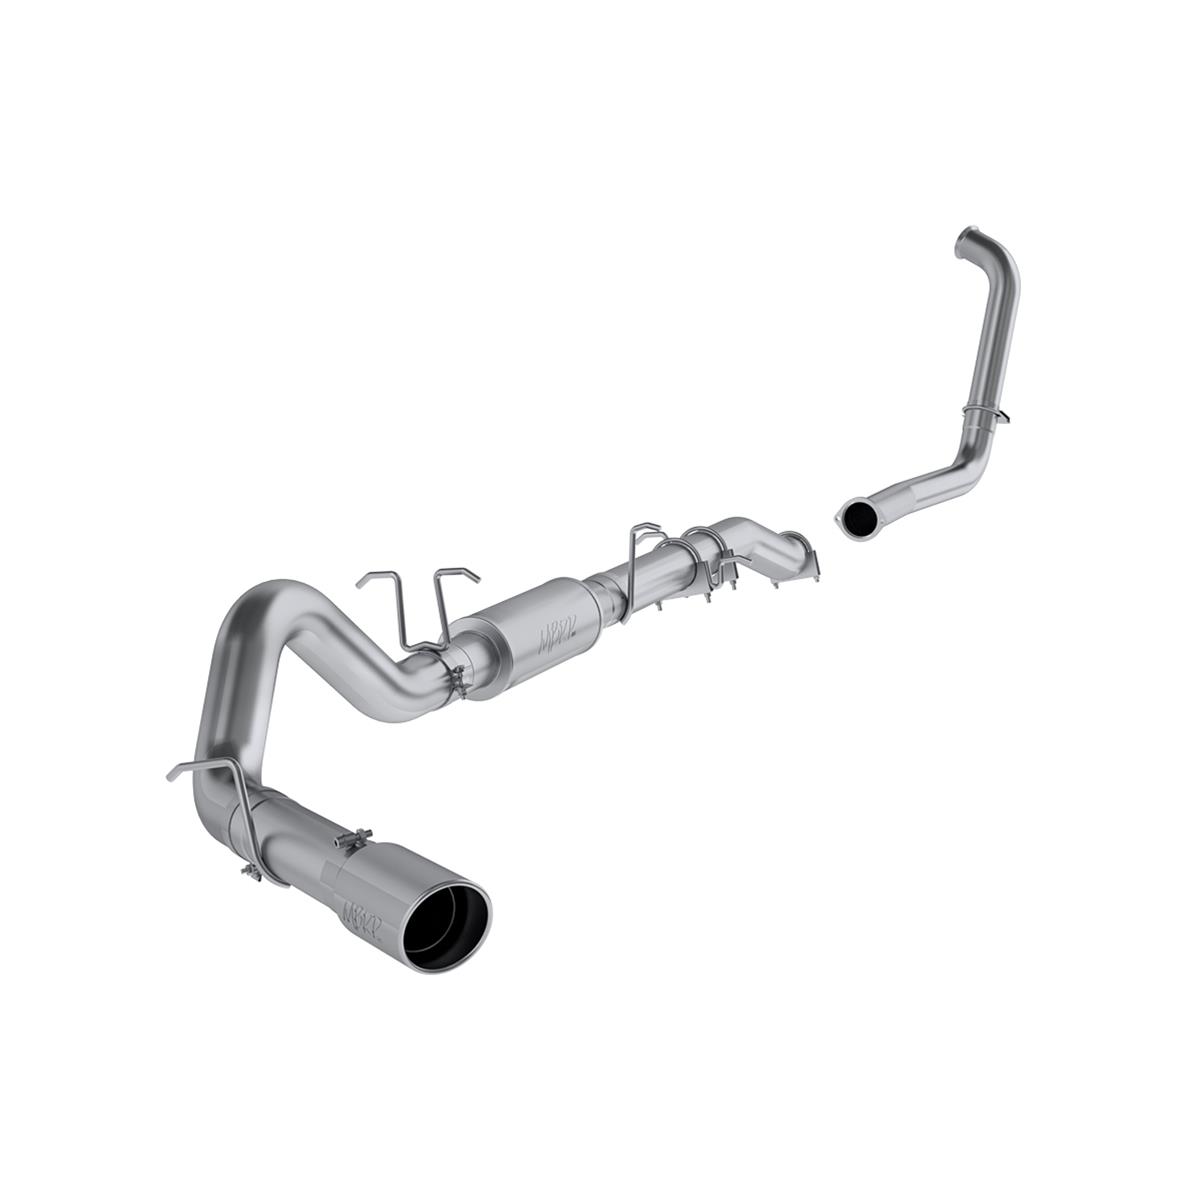 2006 FORD F 250 SUPER DUTY MBRP Performance Exhaust S6206409 MBRP XP